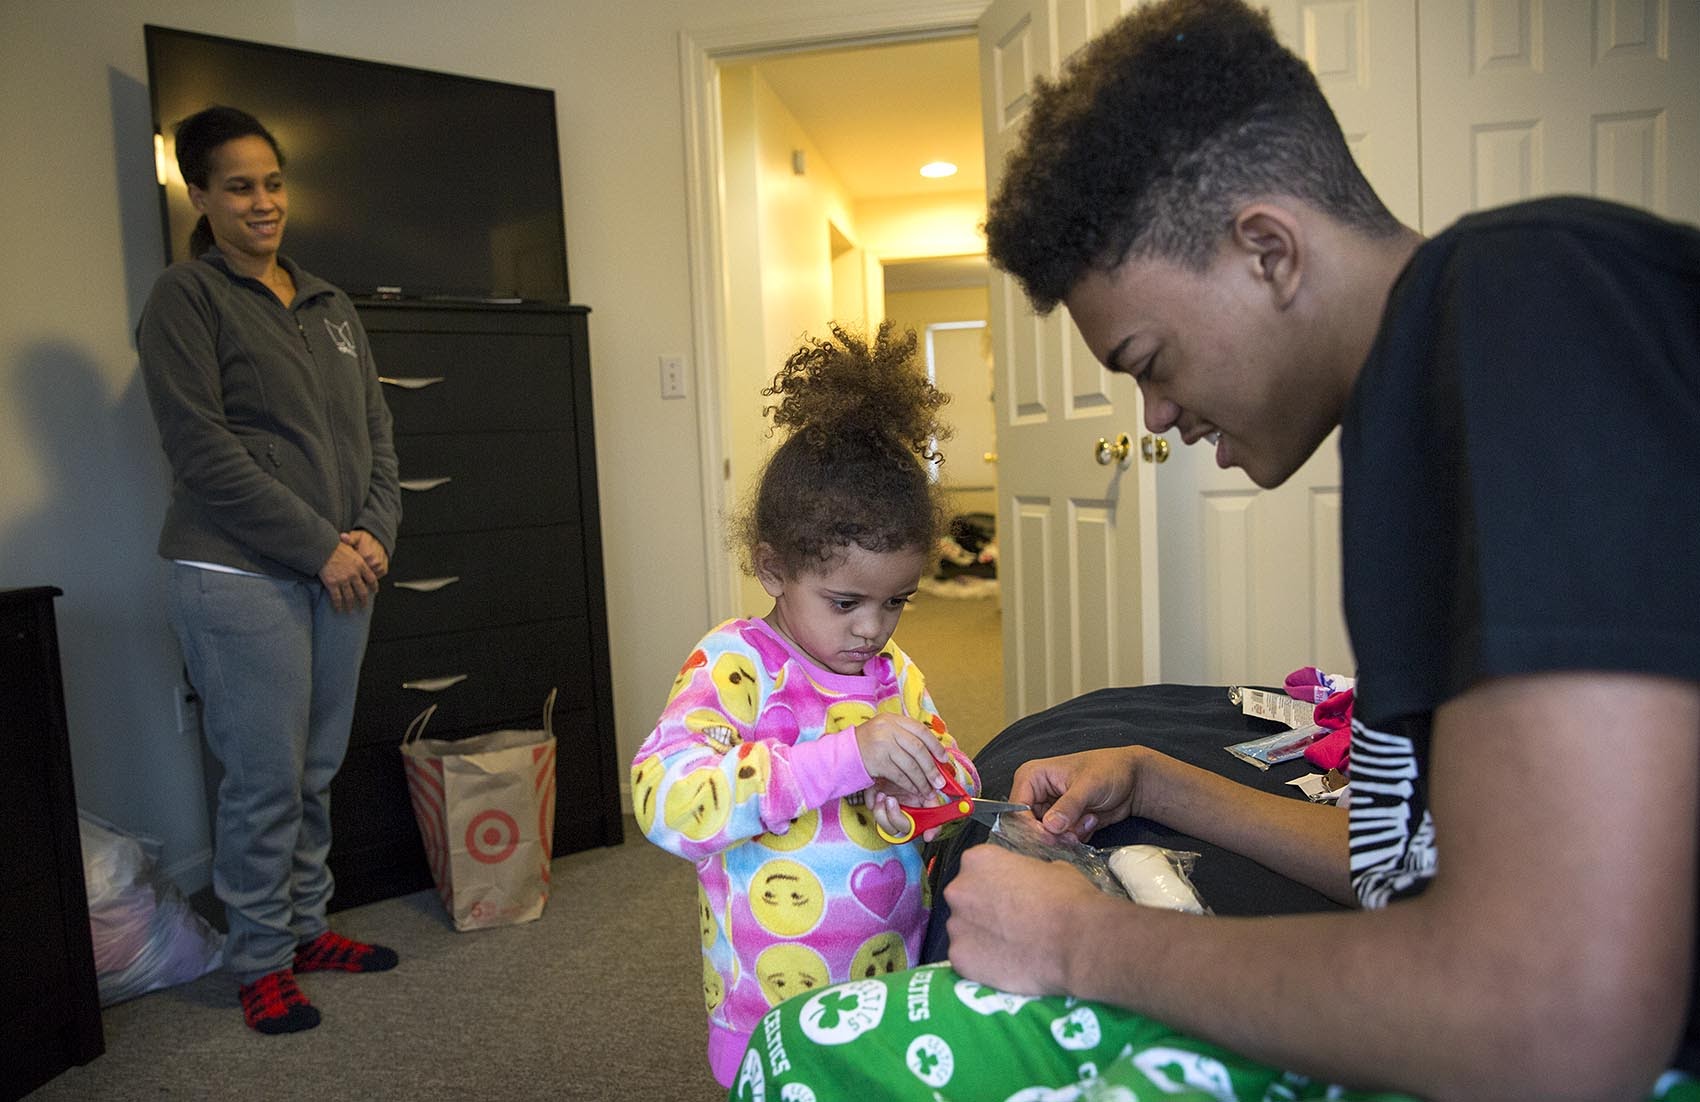 Settling into their new home, Isaiah Robinson, 16, plays with his sister Juliah, 3, as their mother, Heather, looks on. (Robin Lubbock/WBUR)